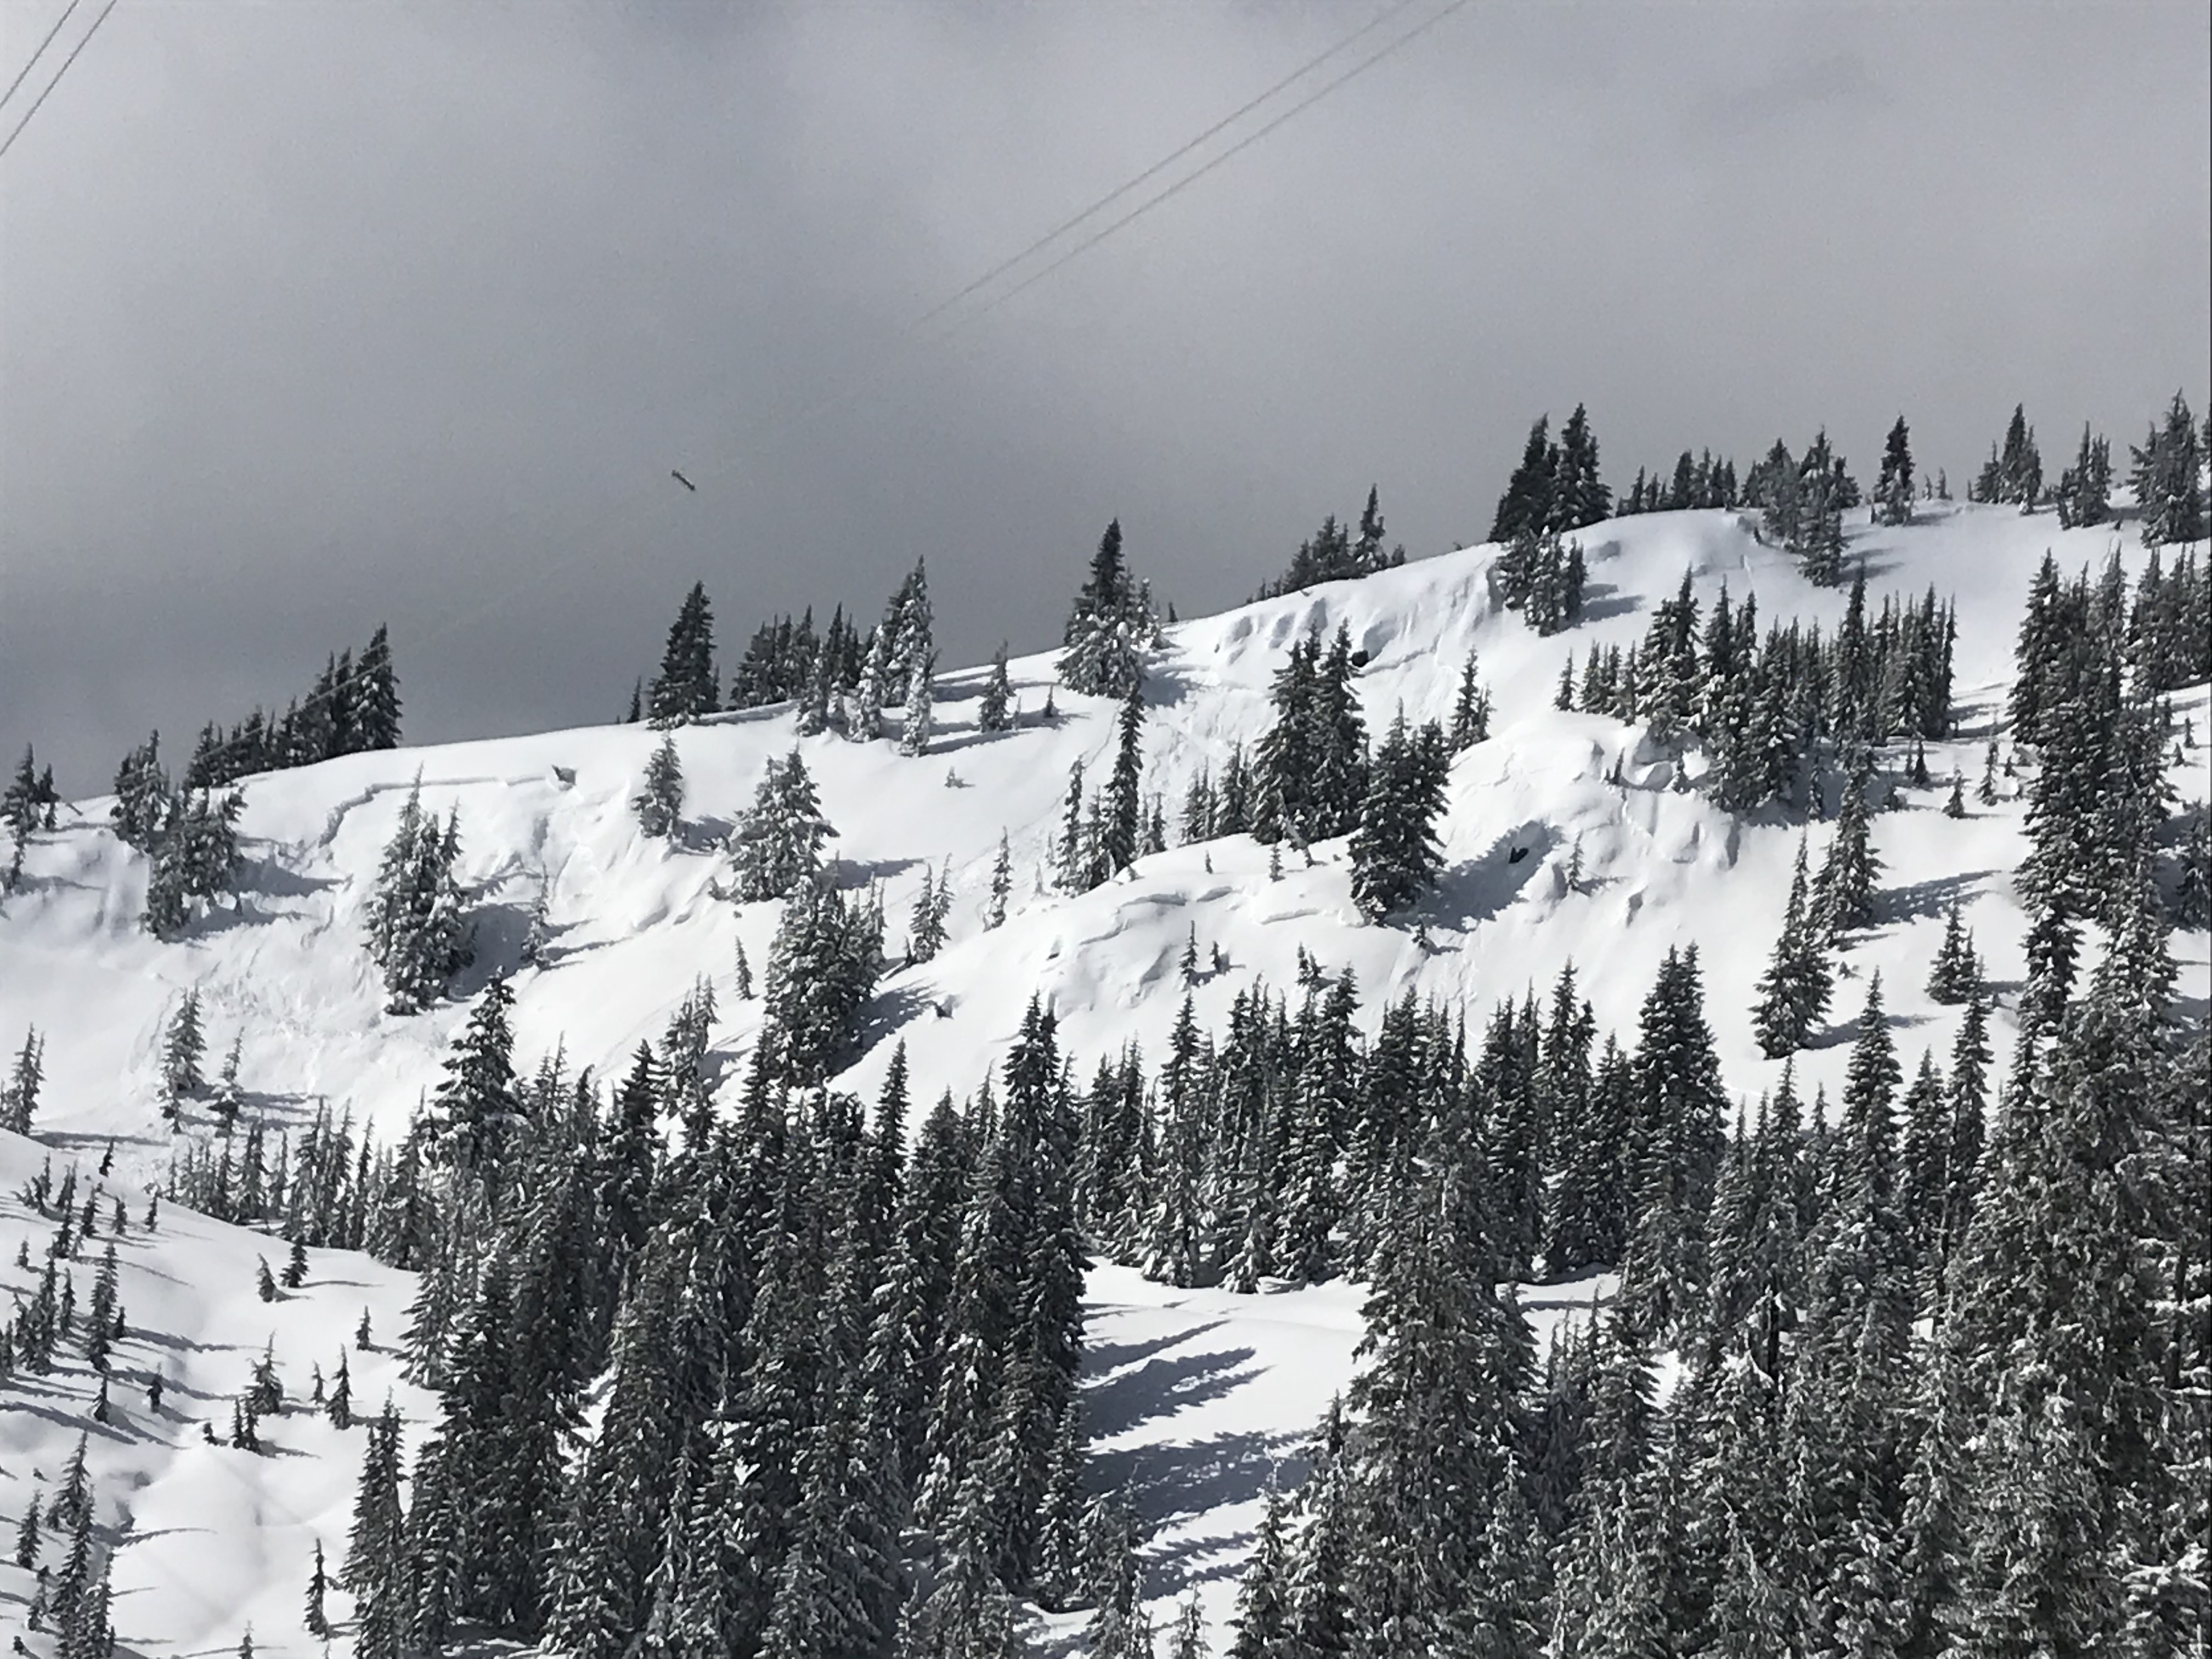 Snow Lake Divide Avalanche Fatality February 25th, 2018